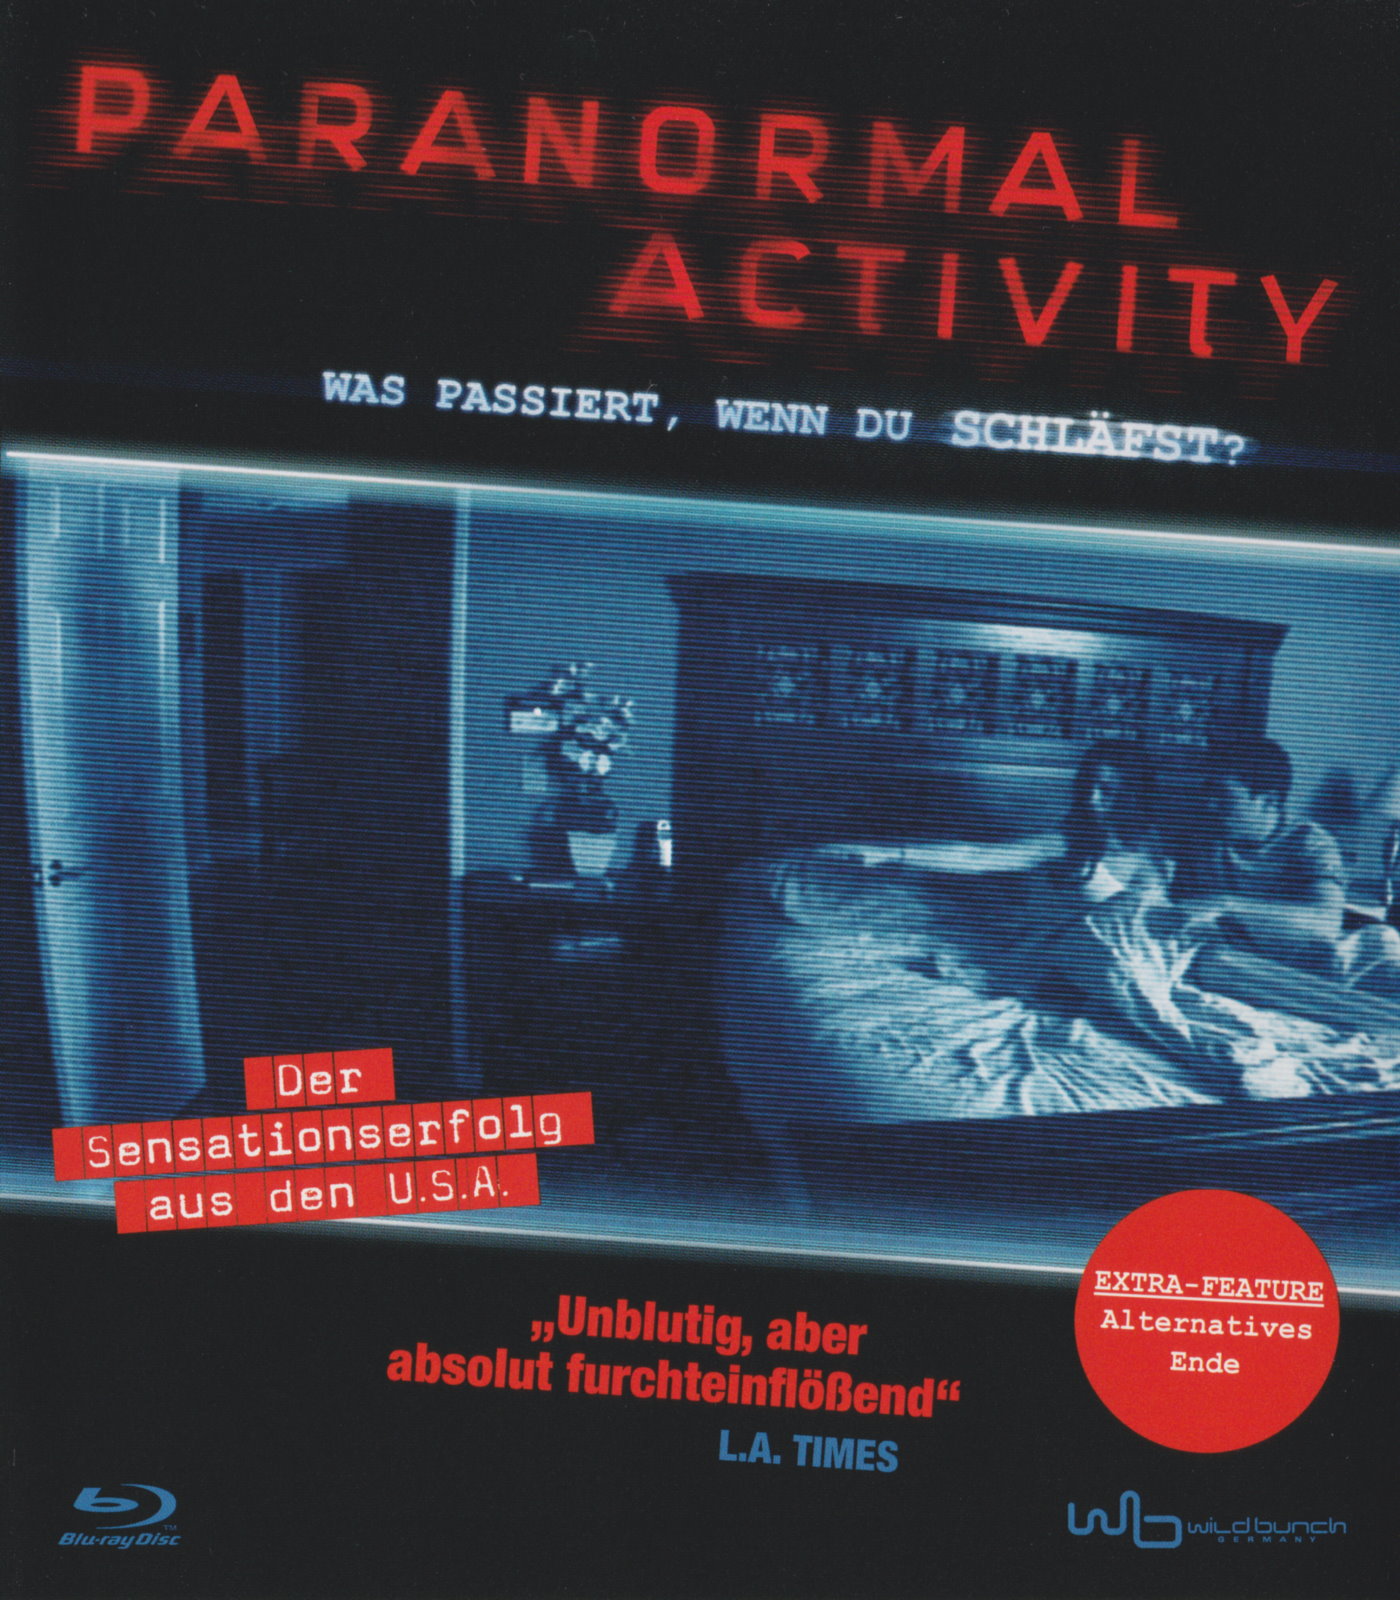 Cover - Paranormal Activity.jpg